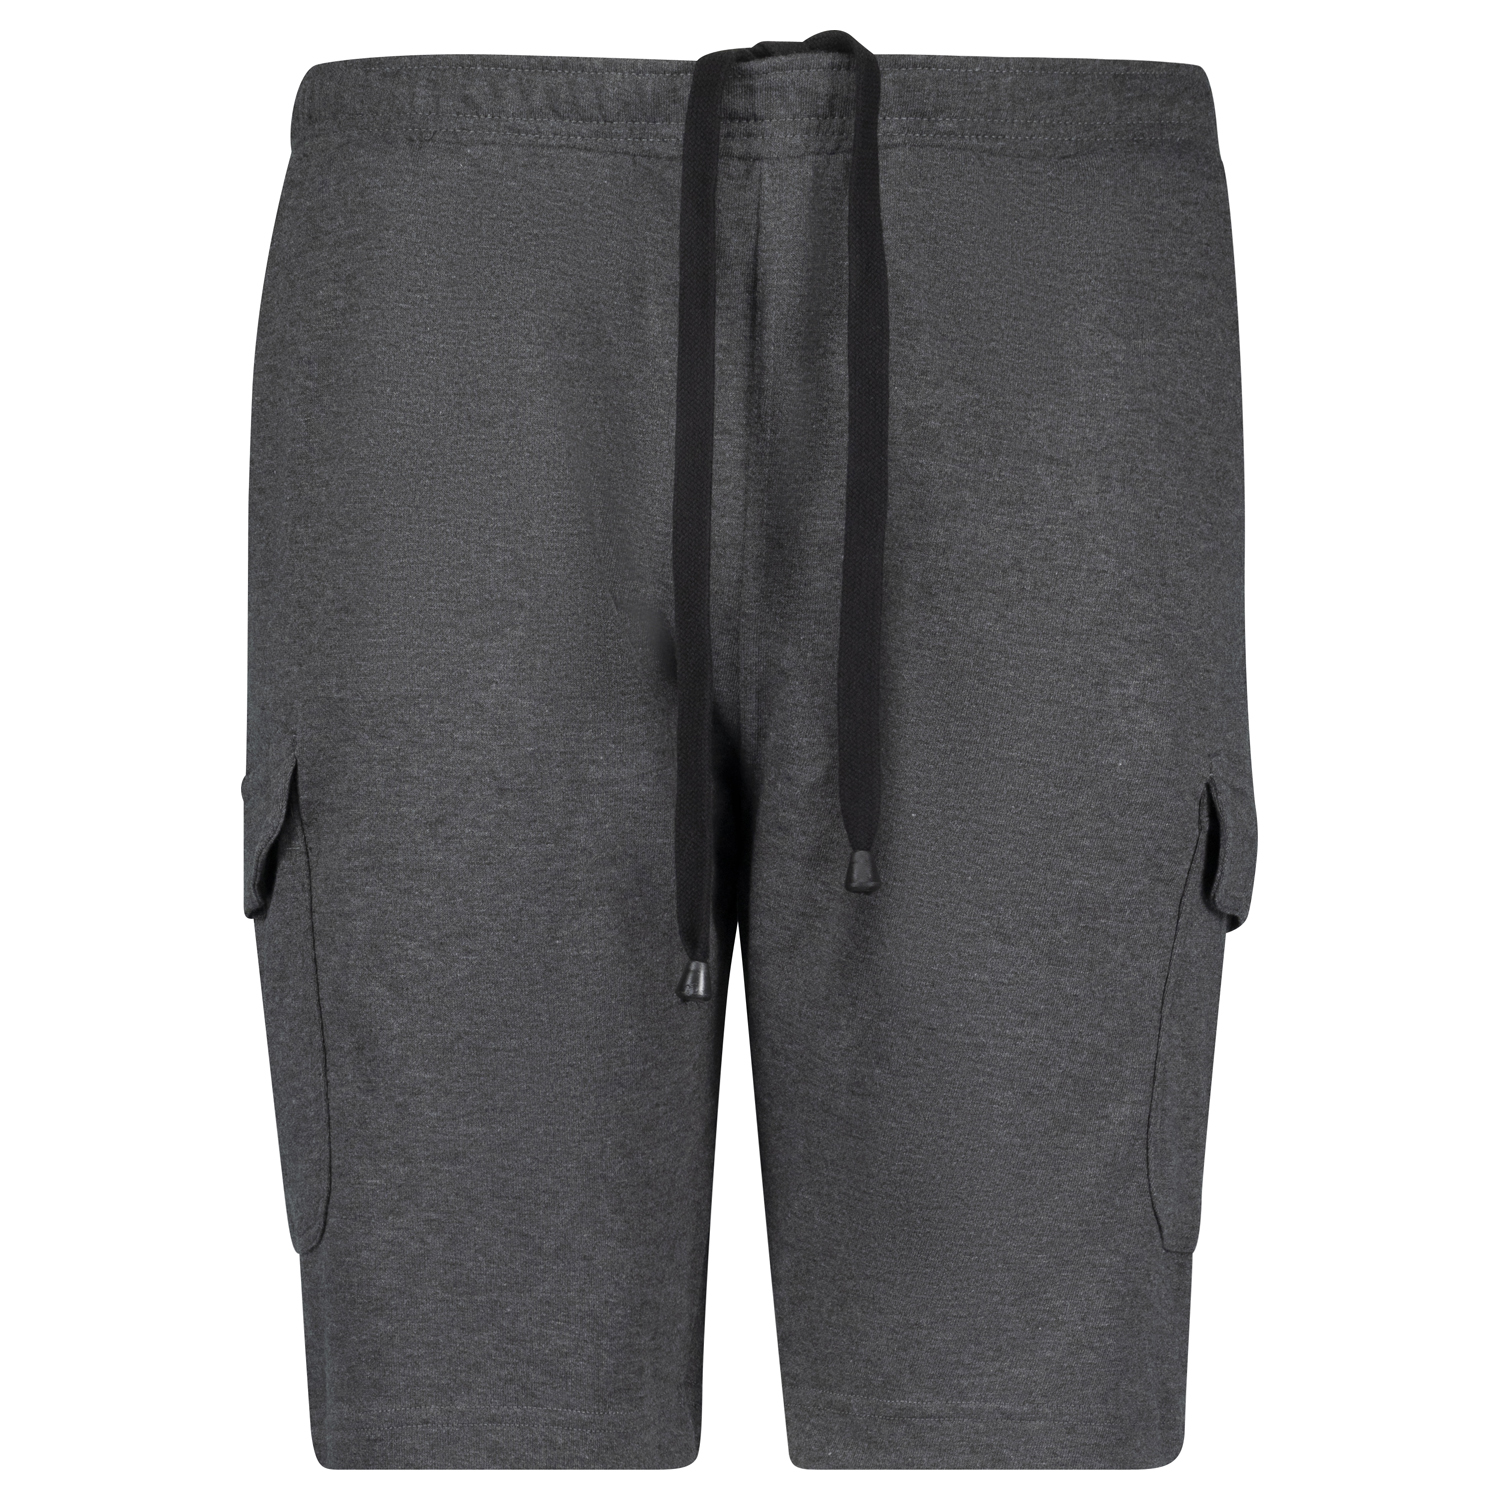 Cargo shorts in anthracite mottled for men by Adamo series "Athen" in oversizes up to 14XL